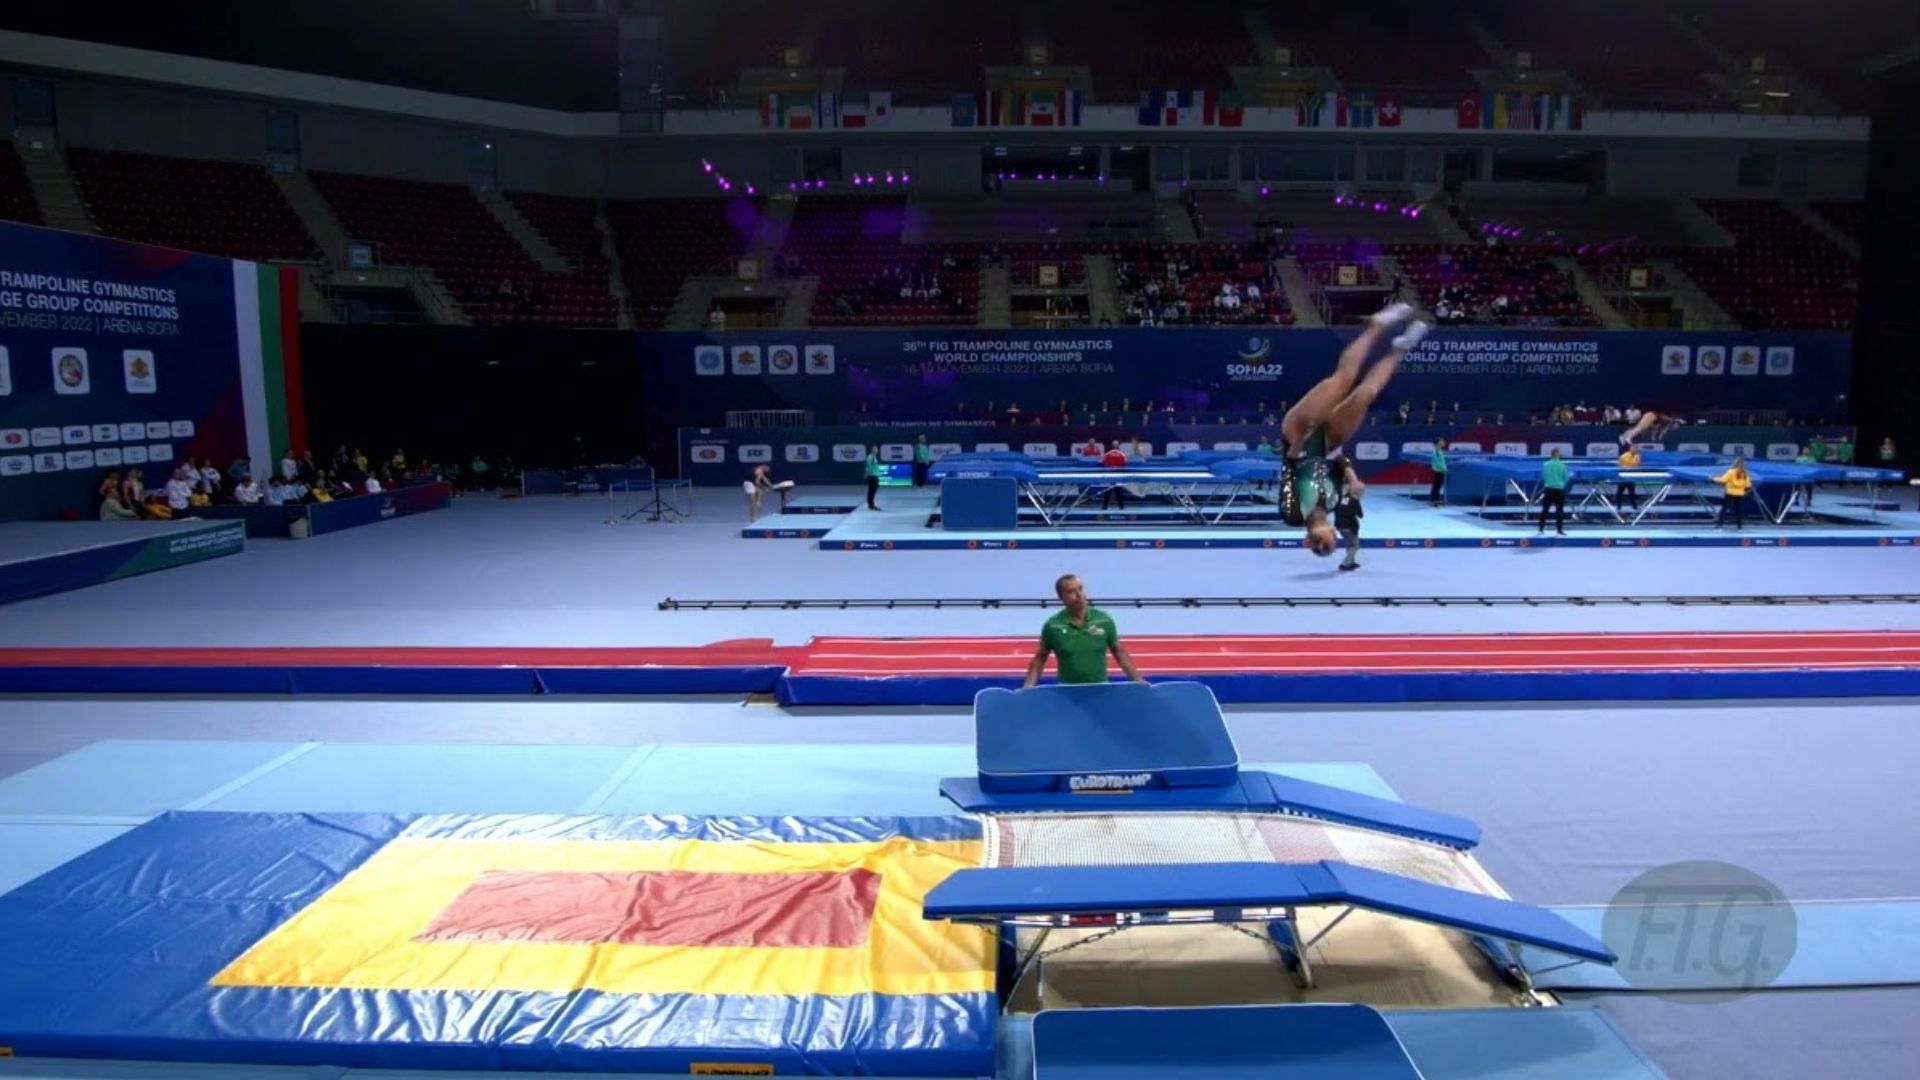 Image of a Trampoline and Tumbling Championships